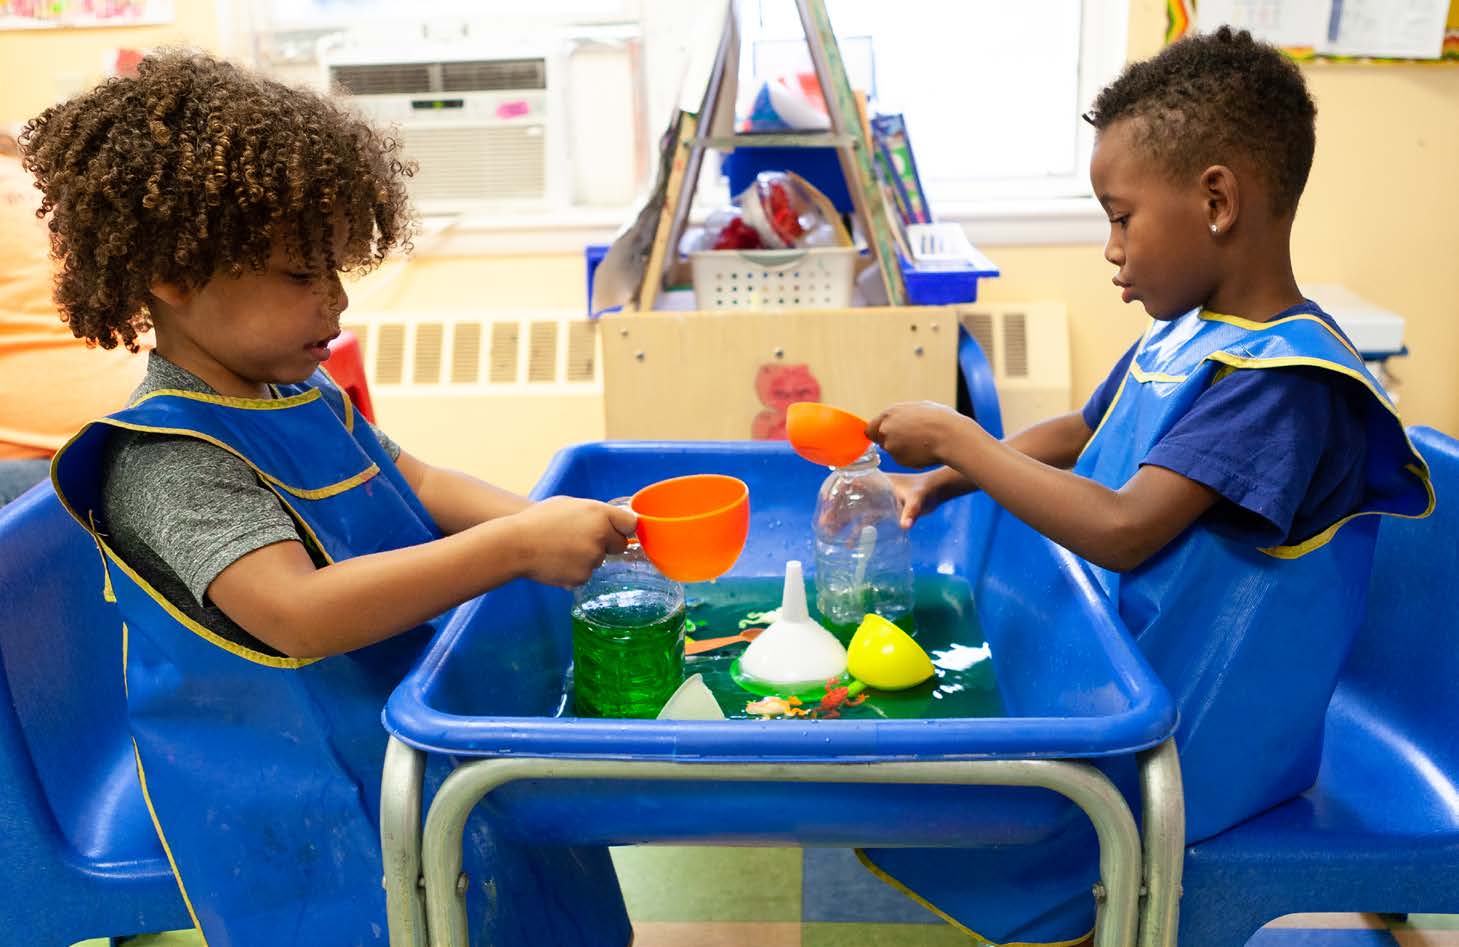 CDC Releases Updated Guidance for Child Care Providers